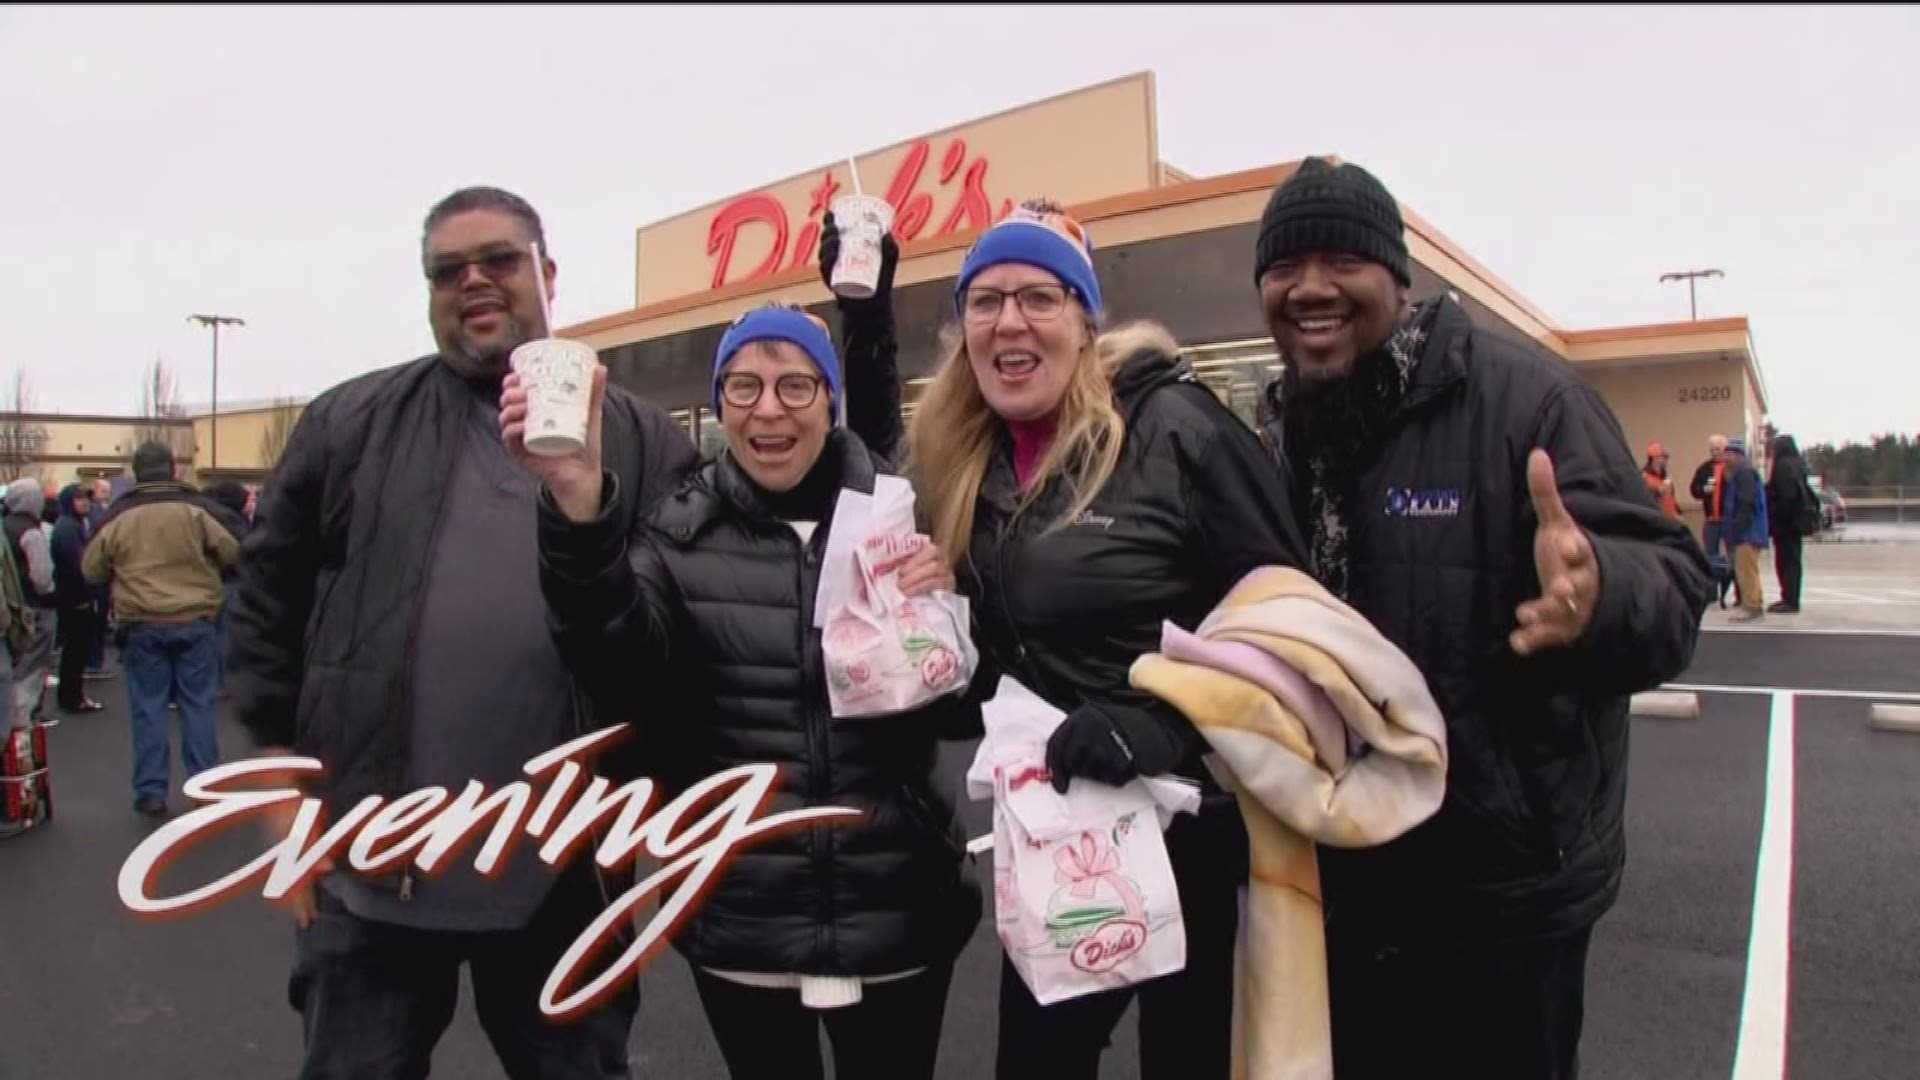 Saint Bryan hosts from the grand opening of the new Dick's Drive-in in Kent.  FEATURING:  The Bus Box,  PontoonWest hot tub boats, Bumpy's Tavern in Puyallup, Weigh-in: Name the new Hockey Team, Cozy Food Round-up,  Kim tries working at Dick's in this thr